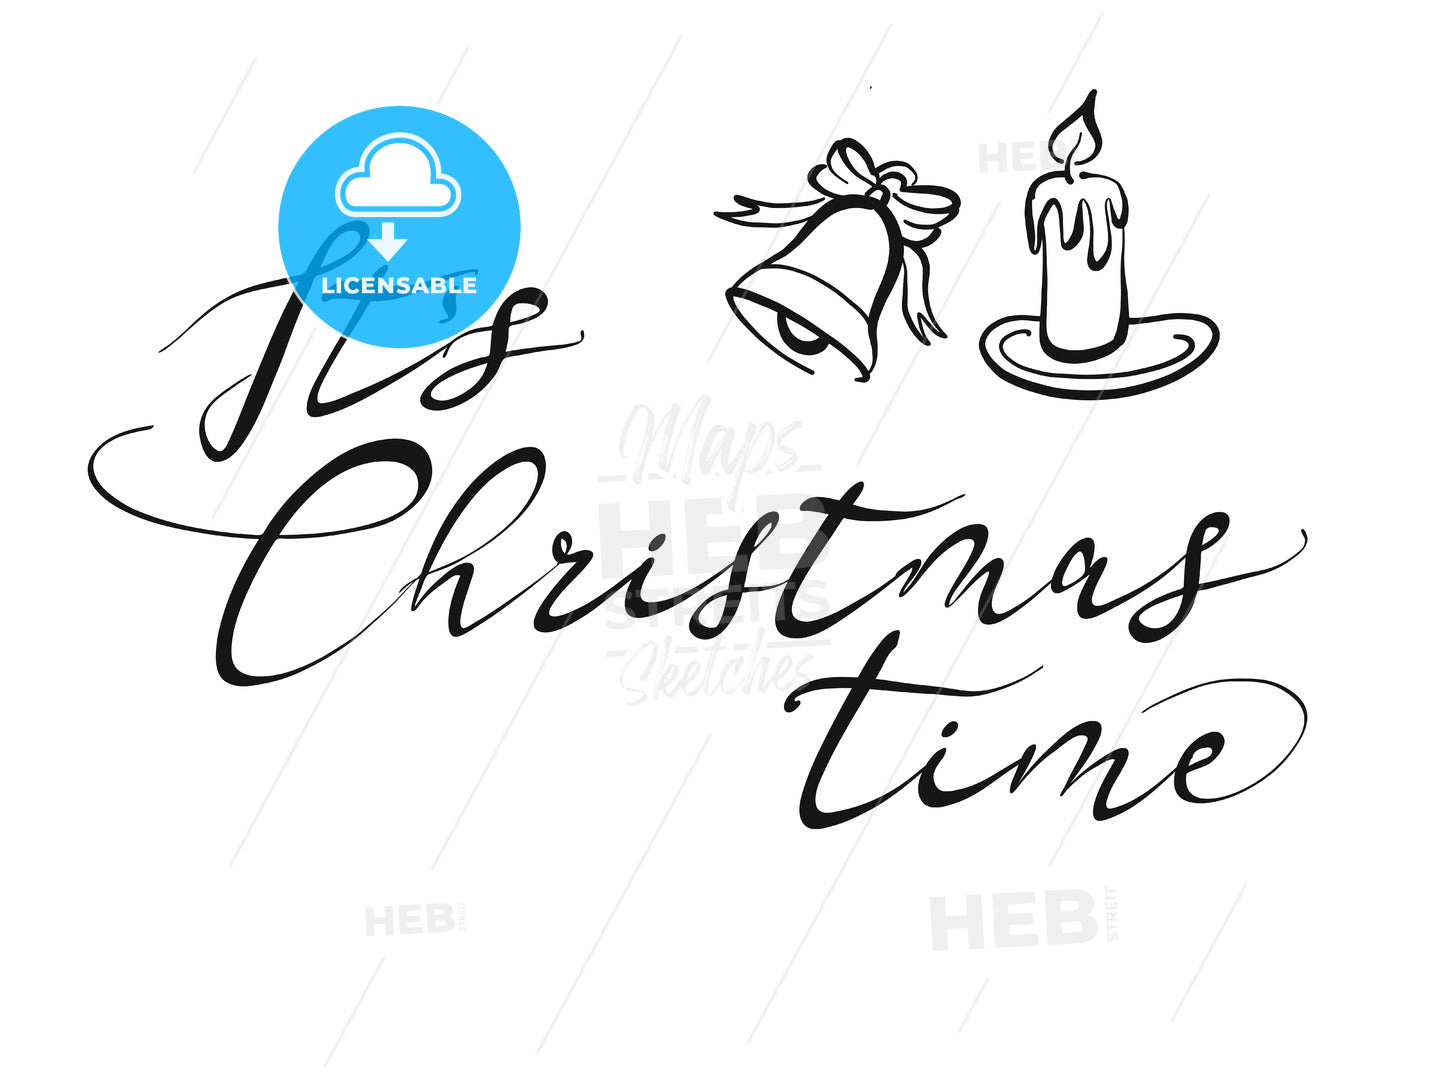 It's Christmas time lettering – instant download